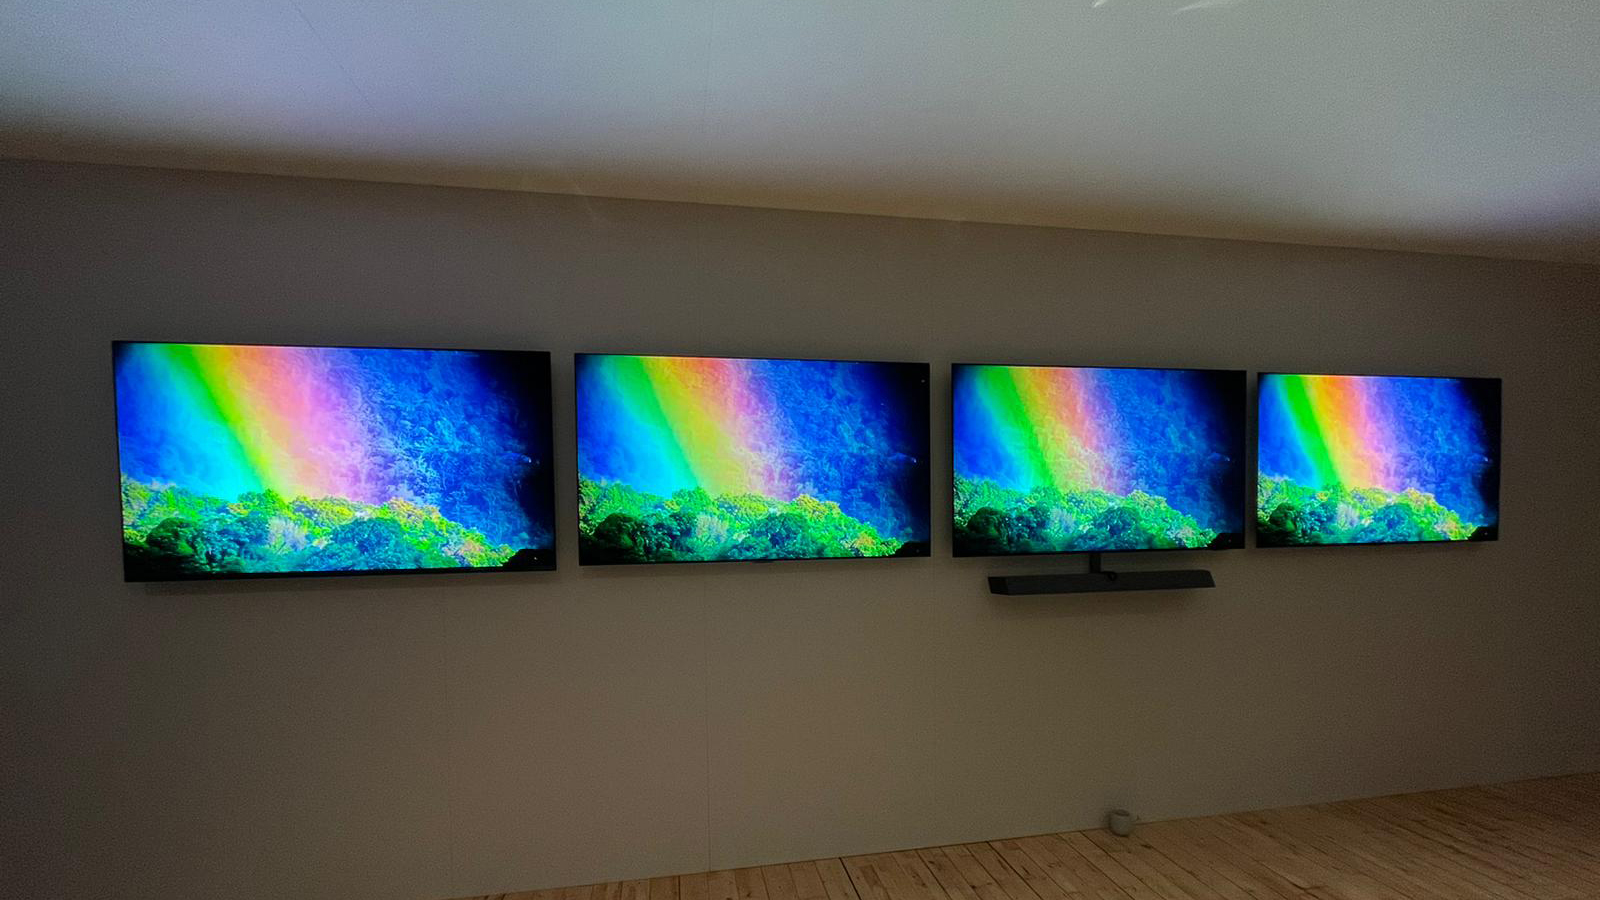 Philips OLED TV with three other OLED TVs on one wall